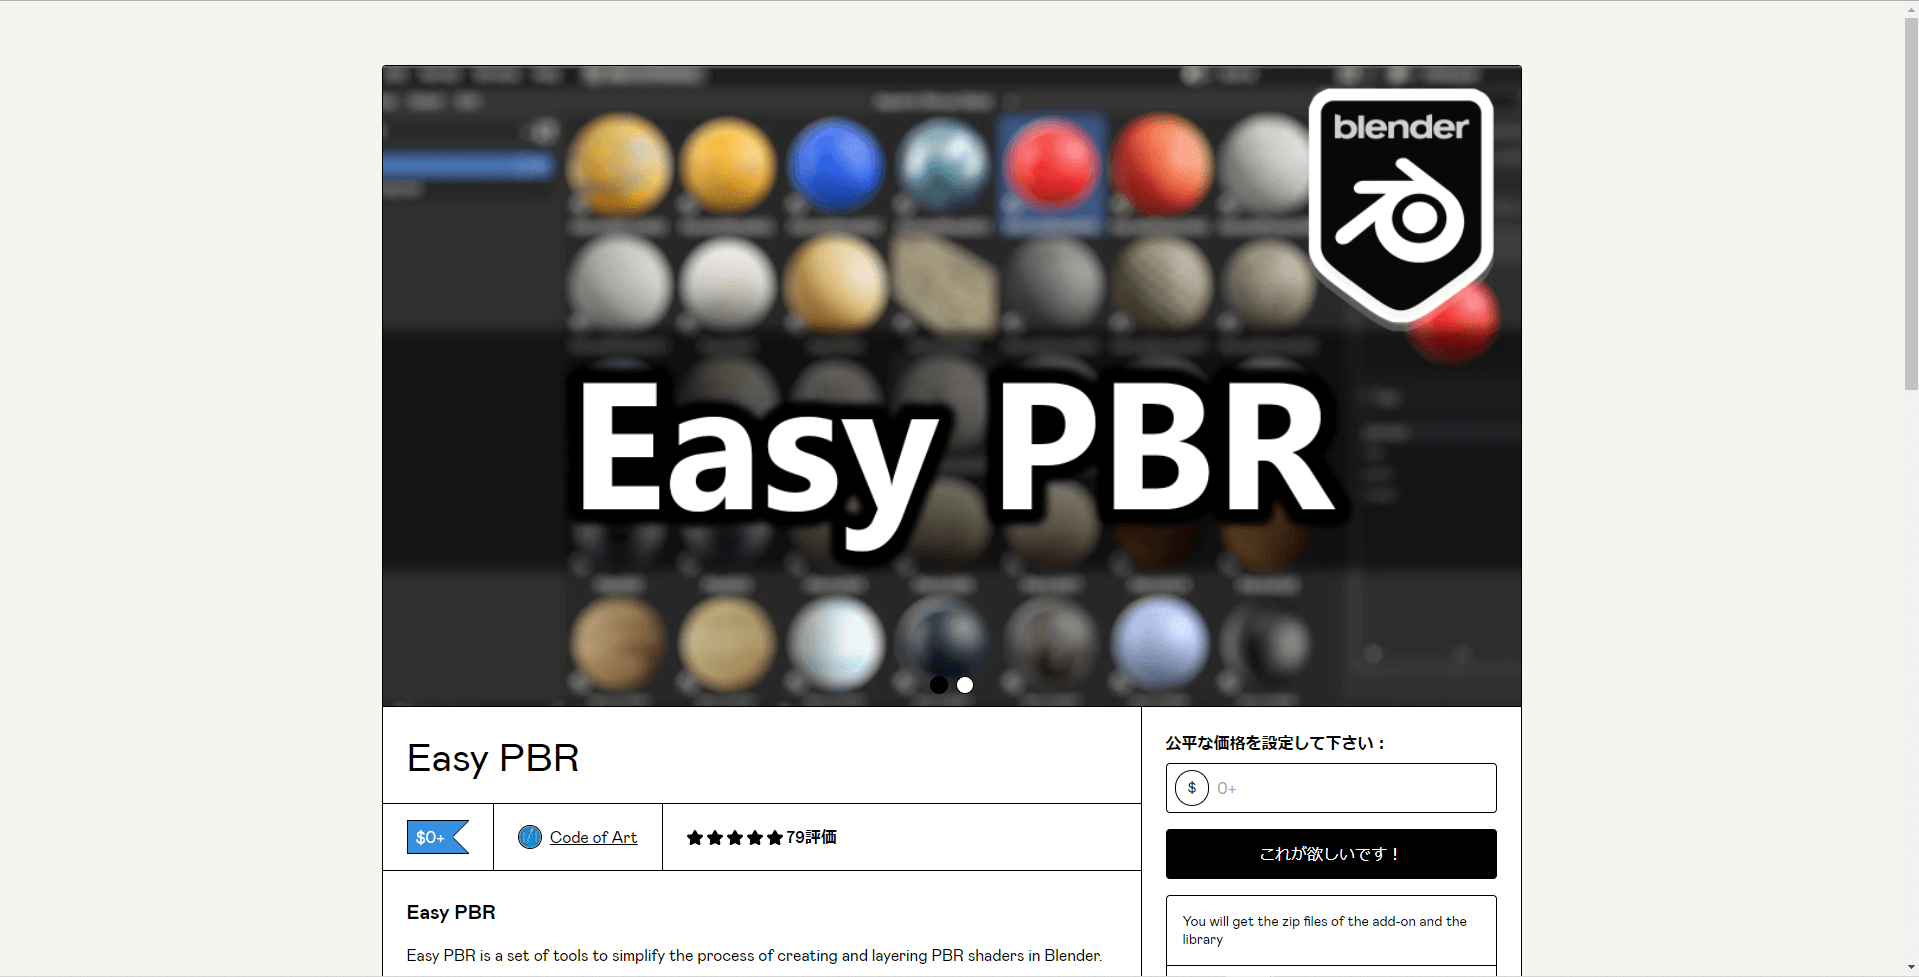 tage medicin Byg op stout Blender] How to create materials with the free Easy PBR add-on- STYLY